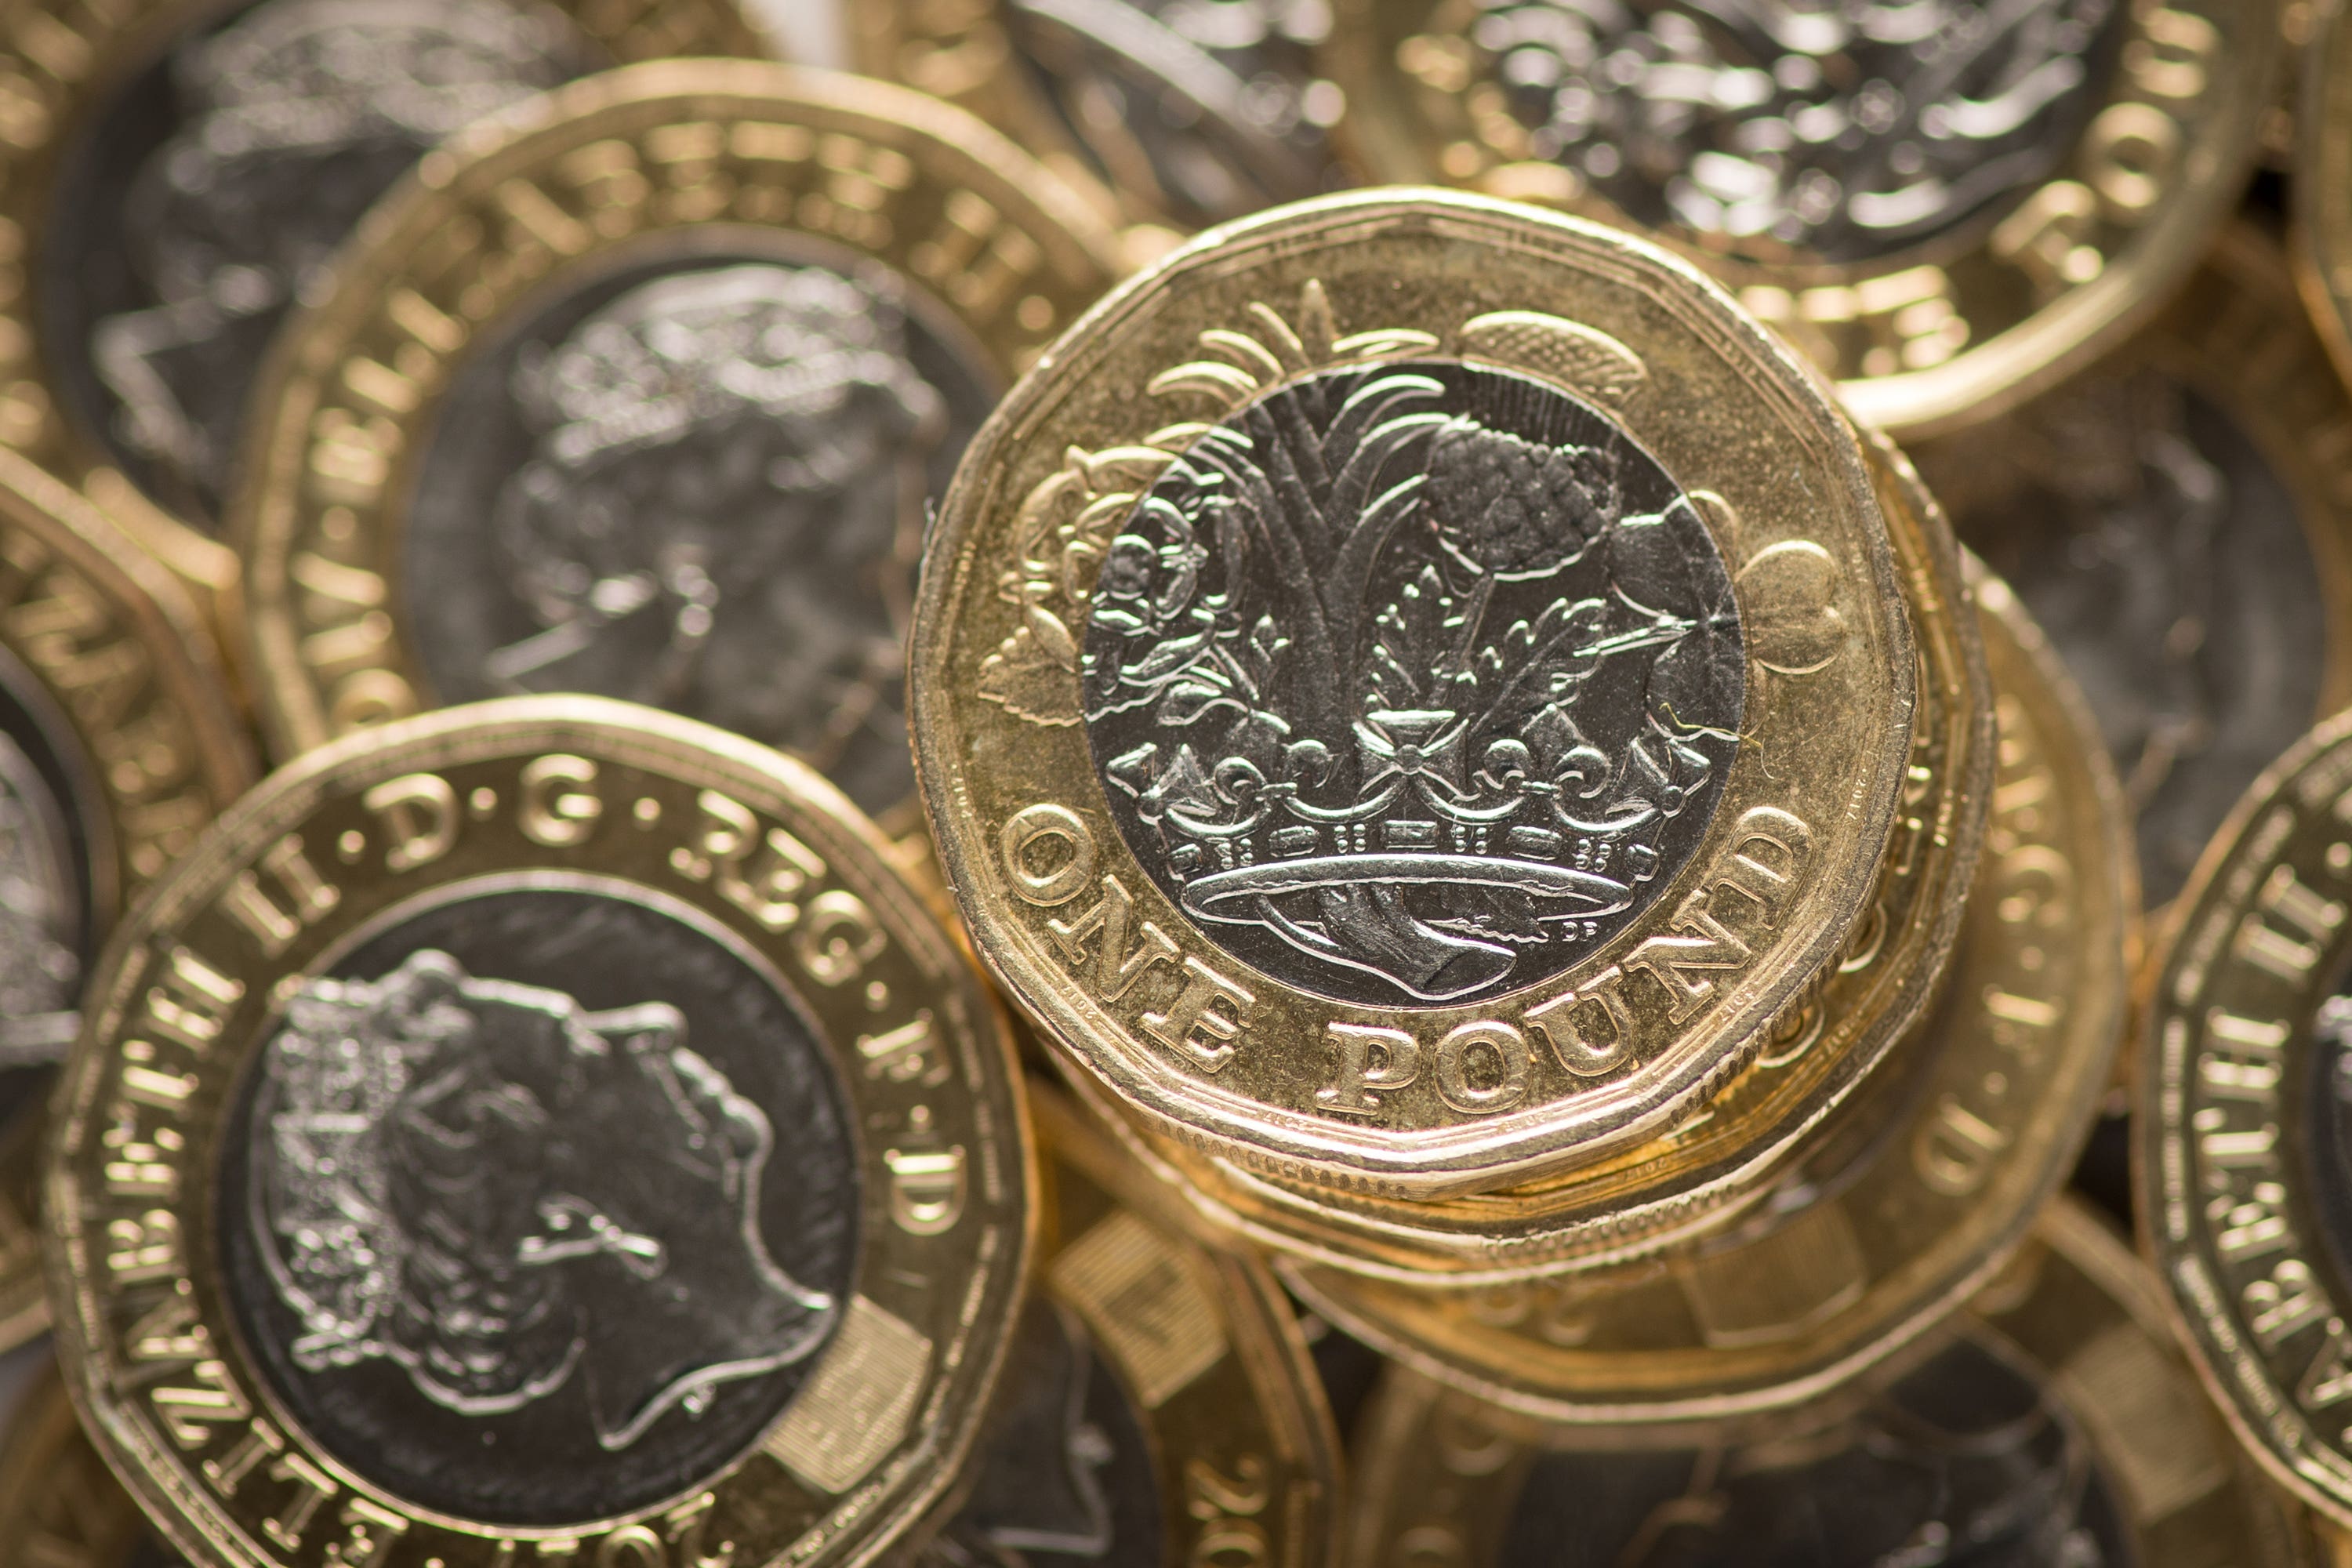 Inflation has fallen back to the 2% target for the first time in nearly three years